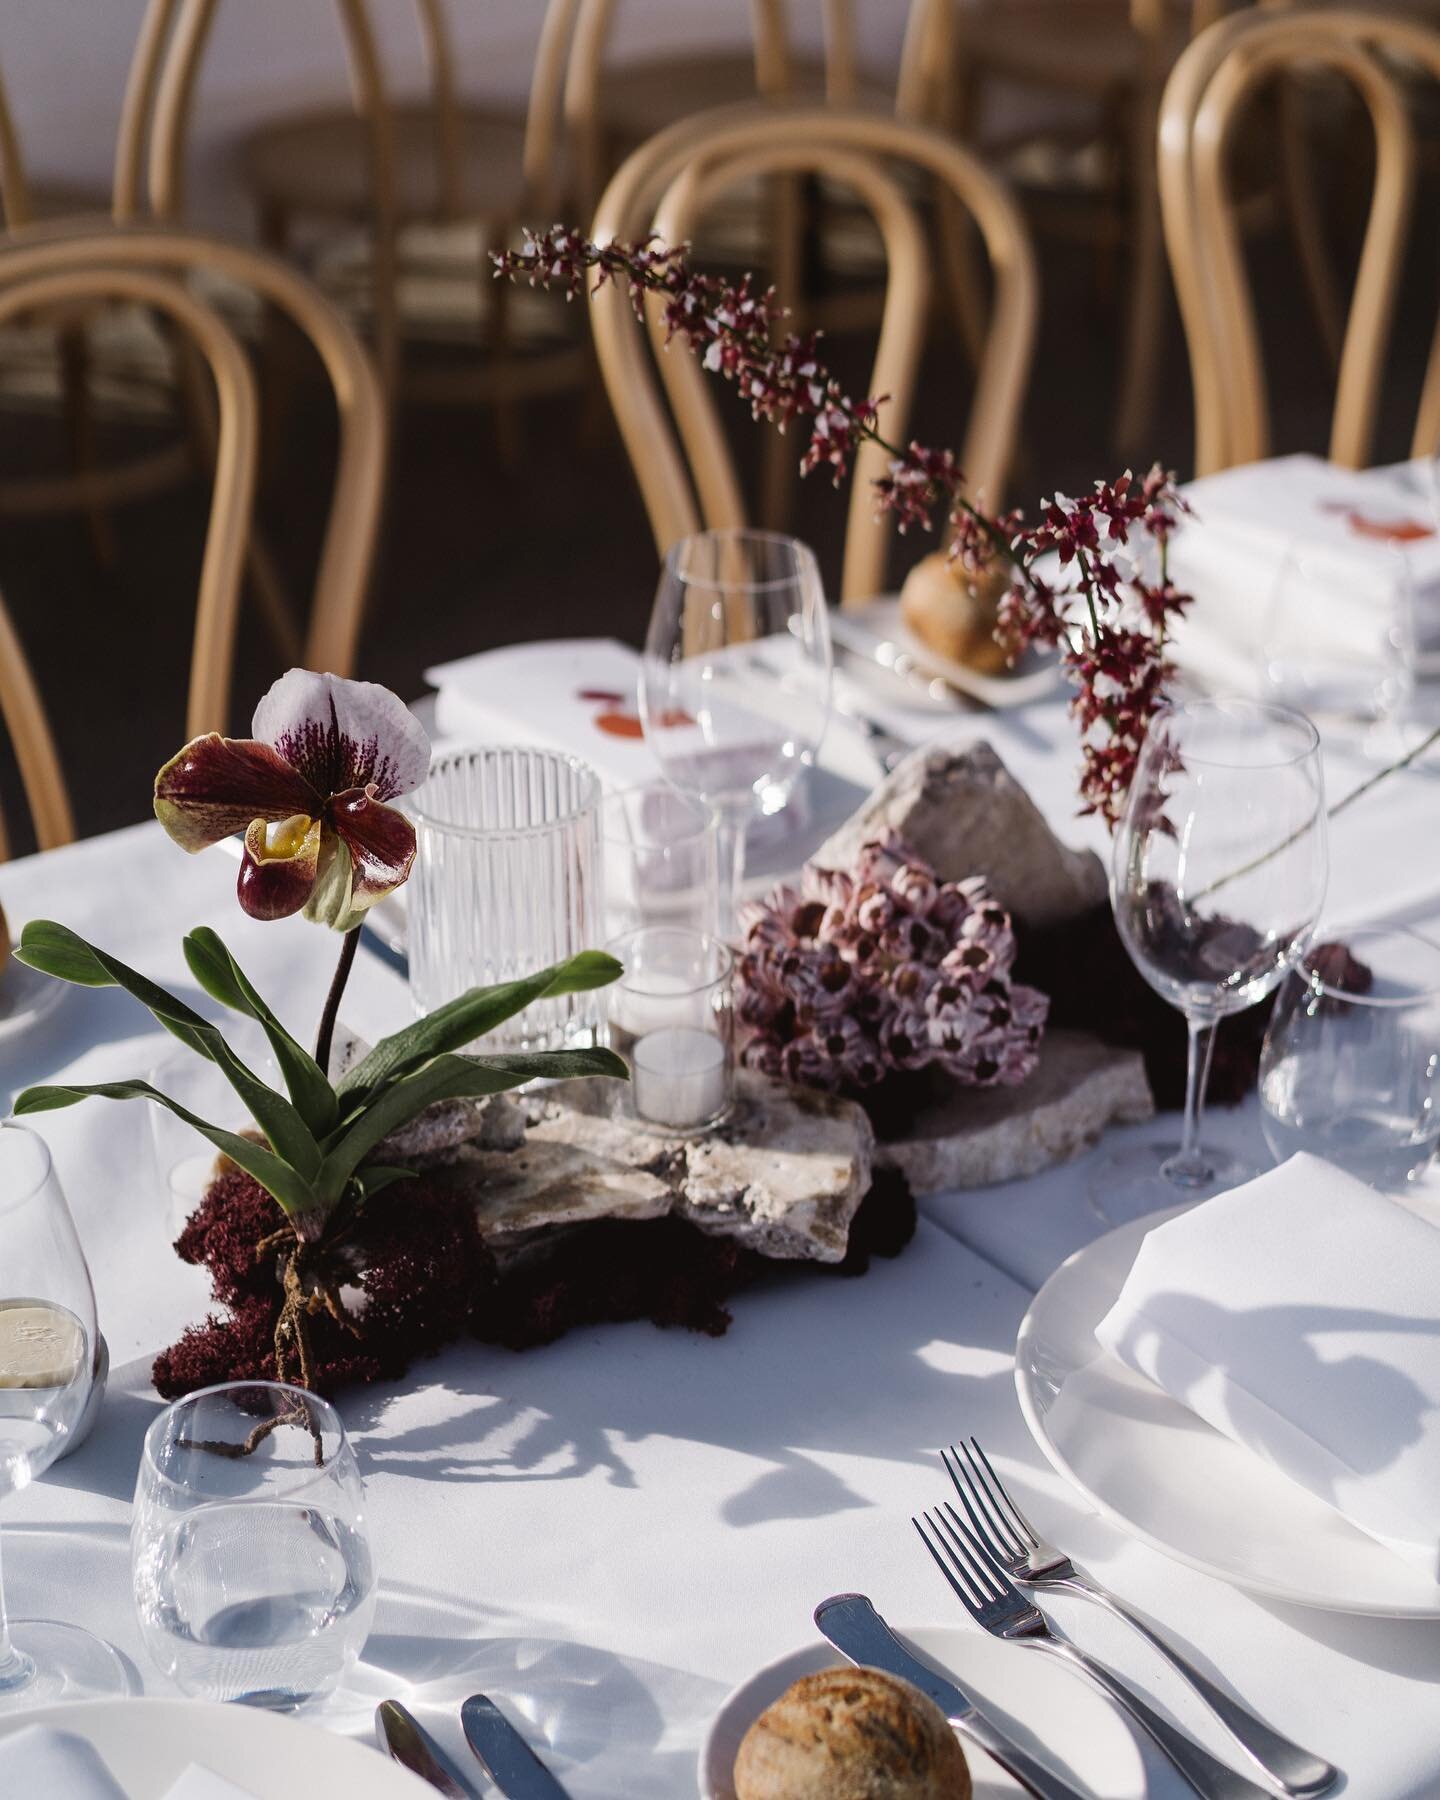 Yummy details from Amelia and Matt&rsquo;s gorgeous wedding. 

Can we please take a minute to appreciate the perfection that is the slipper orchid. 

Photographer: @alexmarksphotography 
Venue: @monafarm_ 

⁠ 
⁠
⁠
⁠
⁠
⁠
⁠
⁠
⁠
⁠
⁠
⁠
⁠
⁠
⁠
⁠
⁠
⁠
⁠
⁠
⁠
